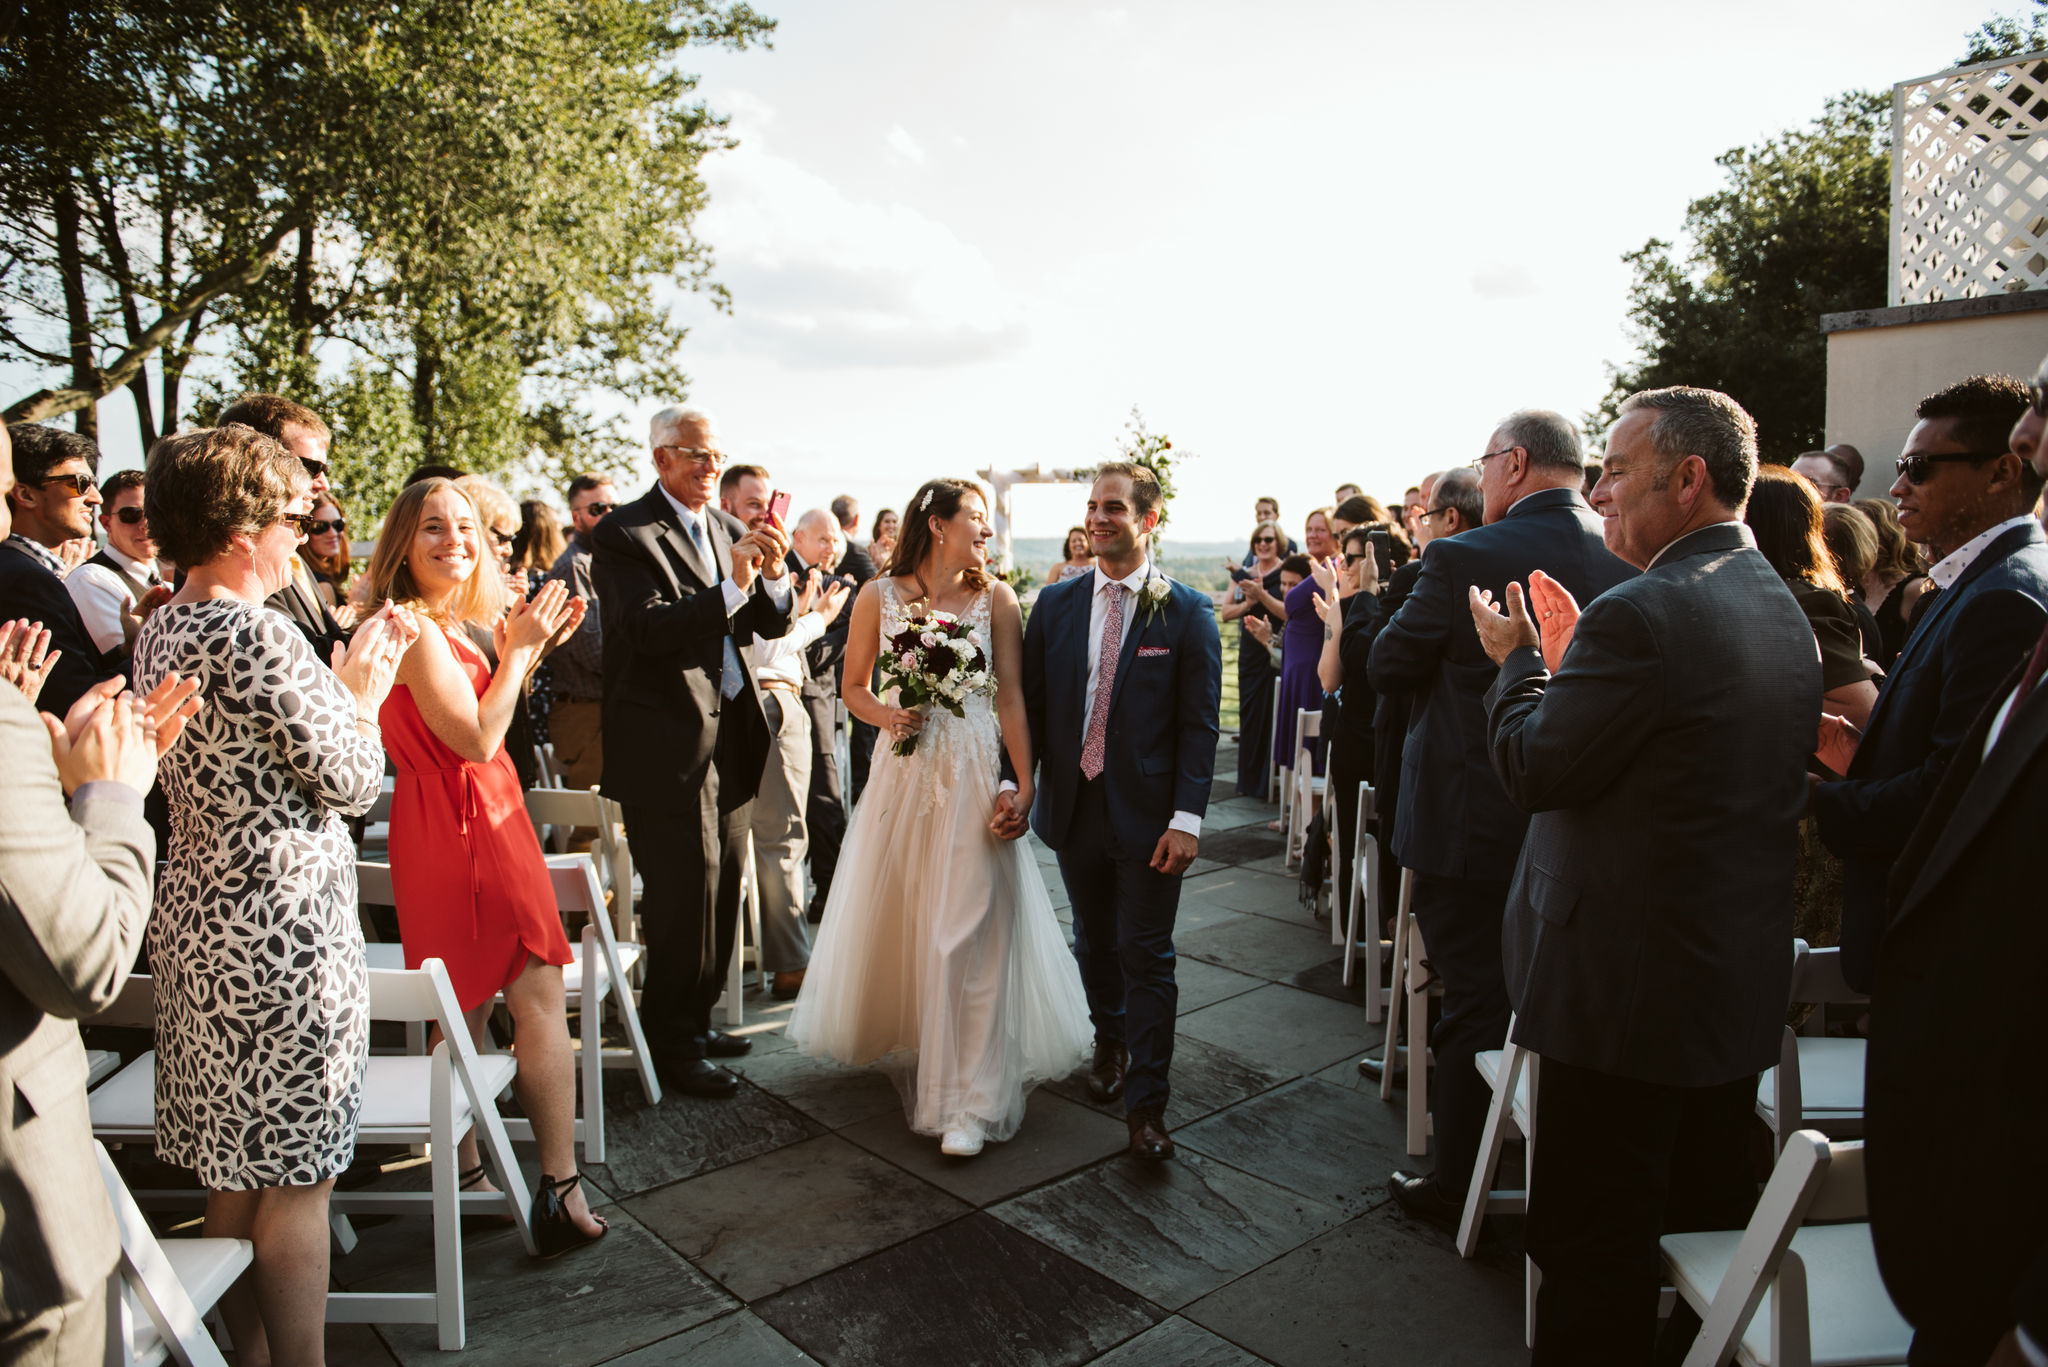  Phoenix Maryland, Baltimore Wedding Photographer, Eagle’s Nest Country Club, Classic, Romantic, Spring, Bride and Groom Walking Down Aisle with Friends Cheering, Just Married, Outdoor Ceremony 